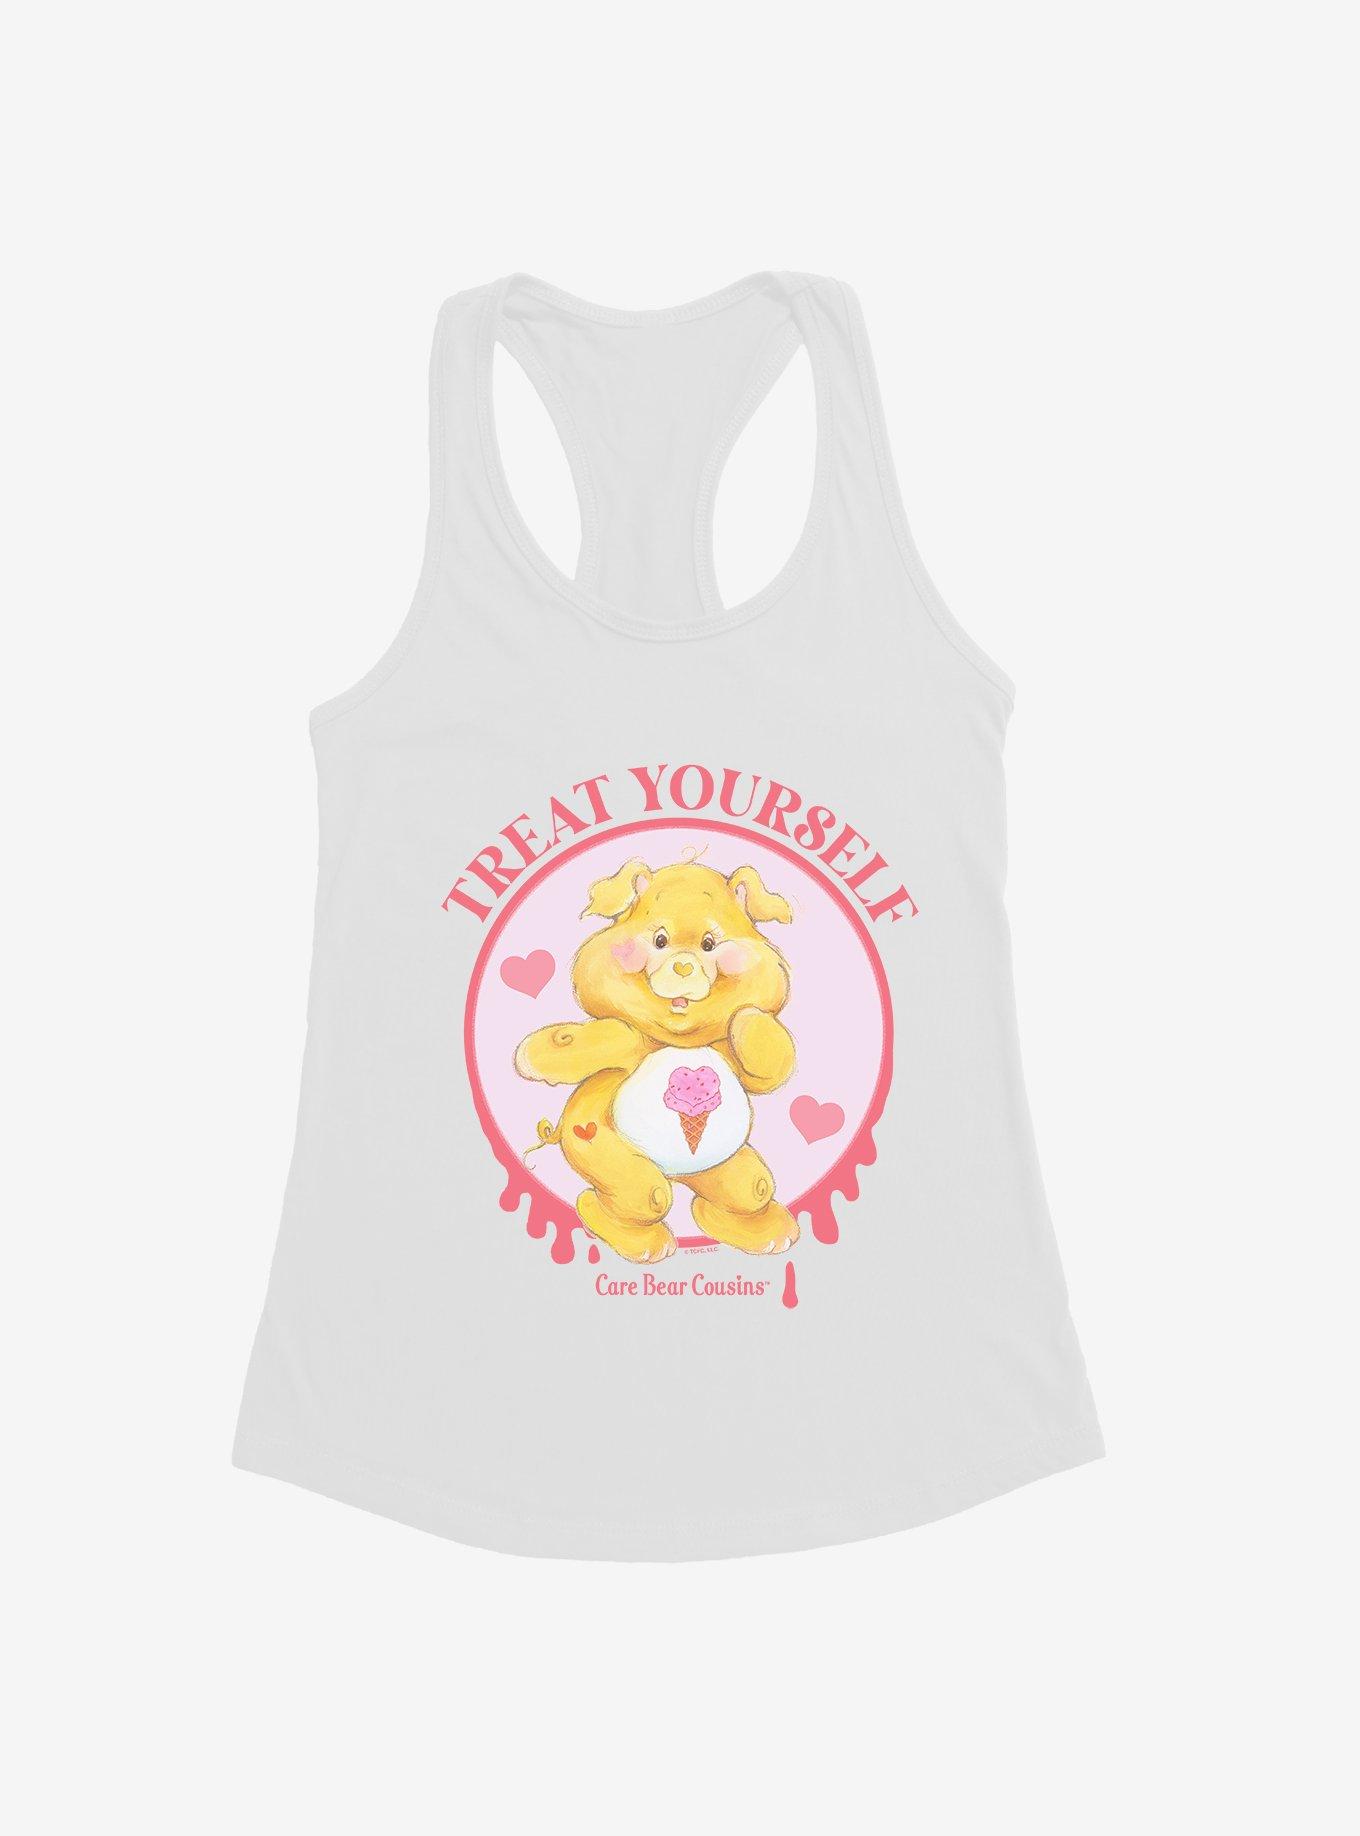 Care Bear Cousins Treat Heart Pig Treat Yourself Girls Tank, WHITE, hi-res